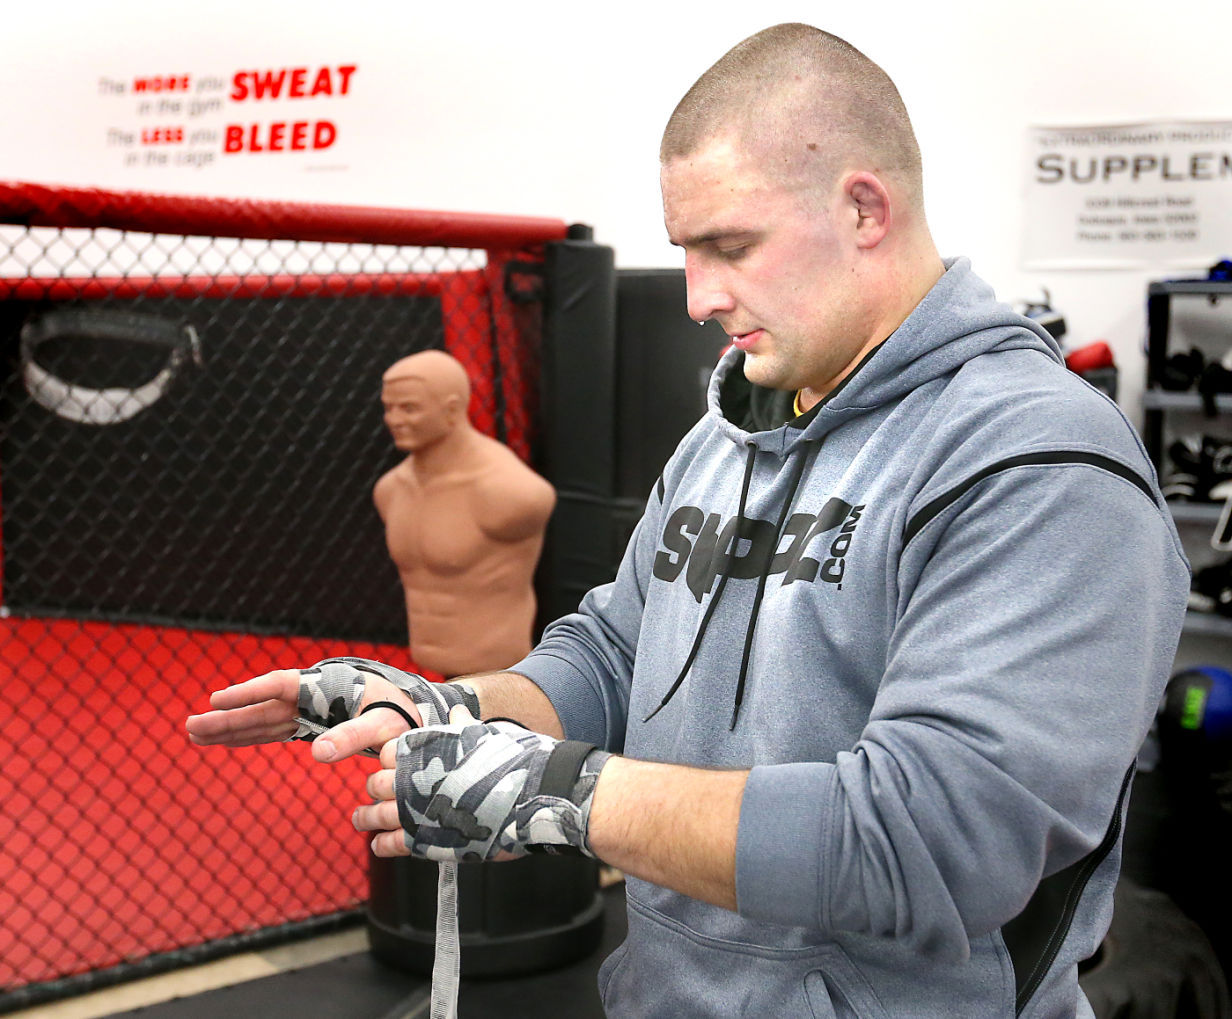 MMA training, fights, gaining foothold in area